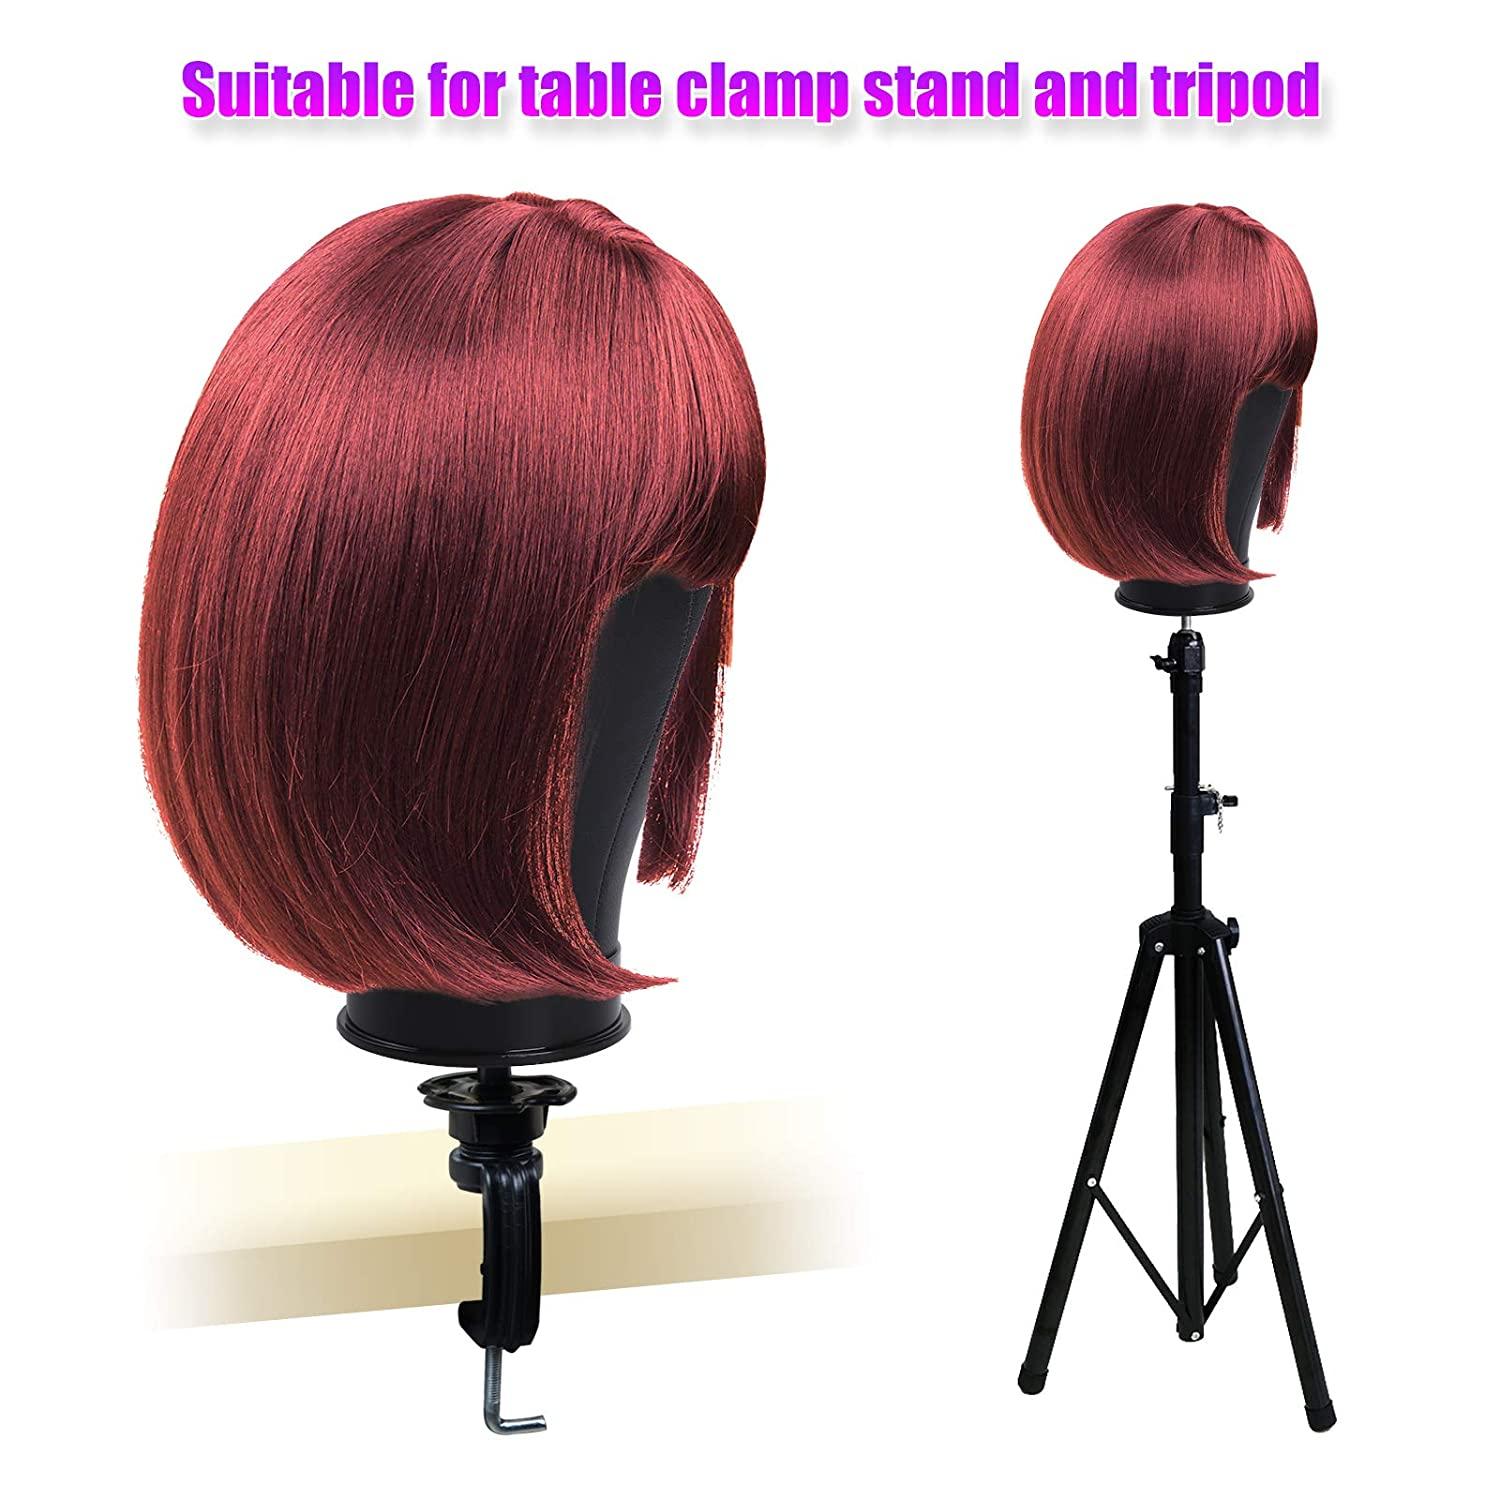 letaomei 22inch Wig Head with Mannequin Head Stand Wig Head Stand with Canvas Block Head with Mount Holder Mannequin Head for Display Making Wigs